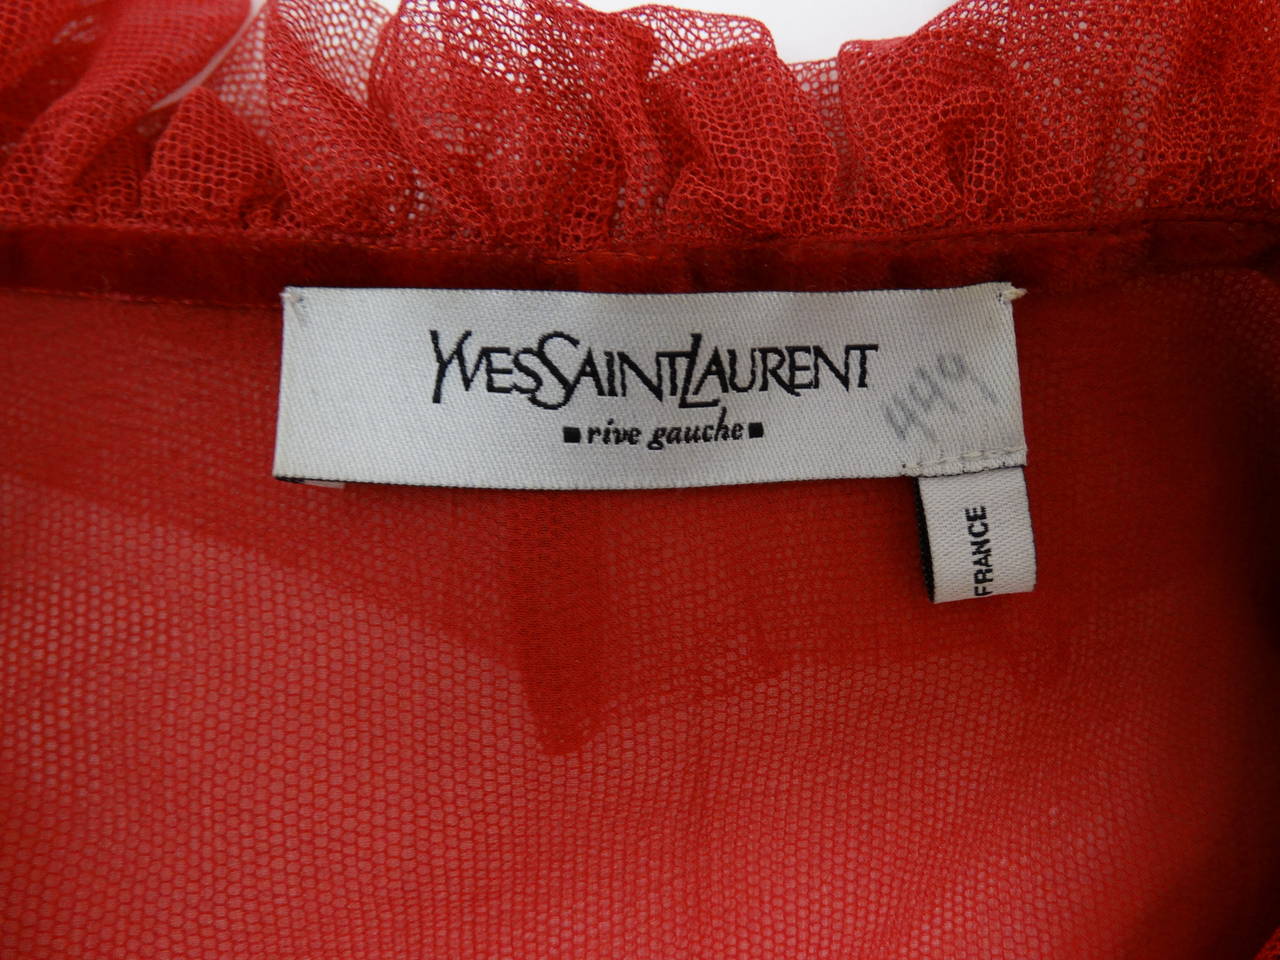 Very rare ruffled red silk net blouse and skirt designed by Tom Ford for Yves Saint Laurent, fall 2002. Ensemble fits a size 2-4. Blouse measures: 32-34